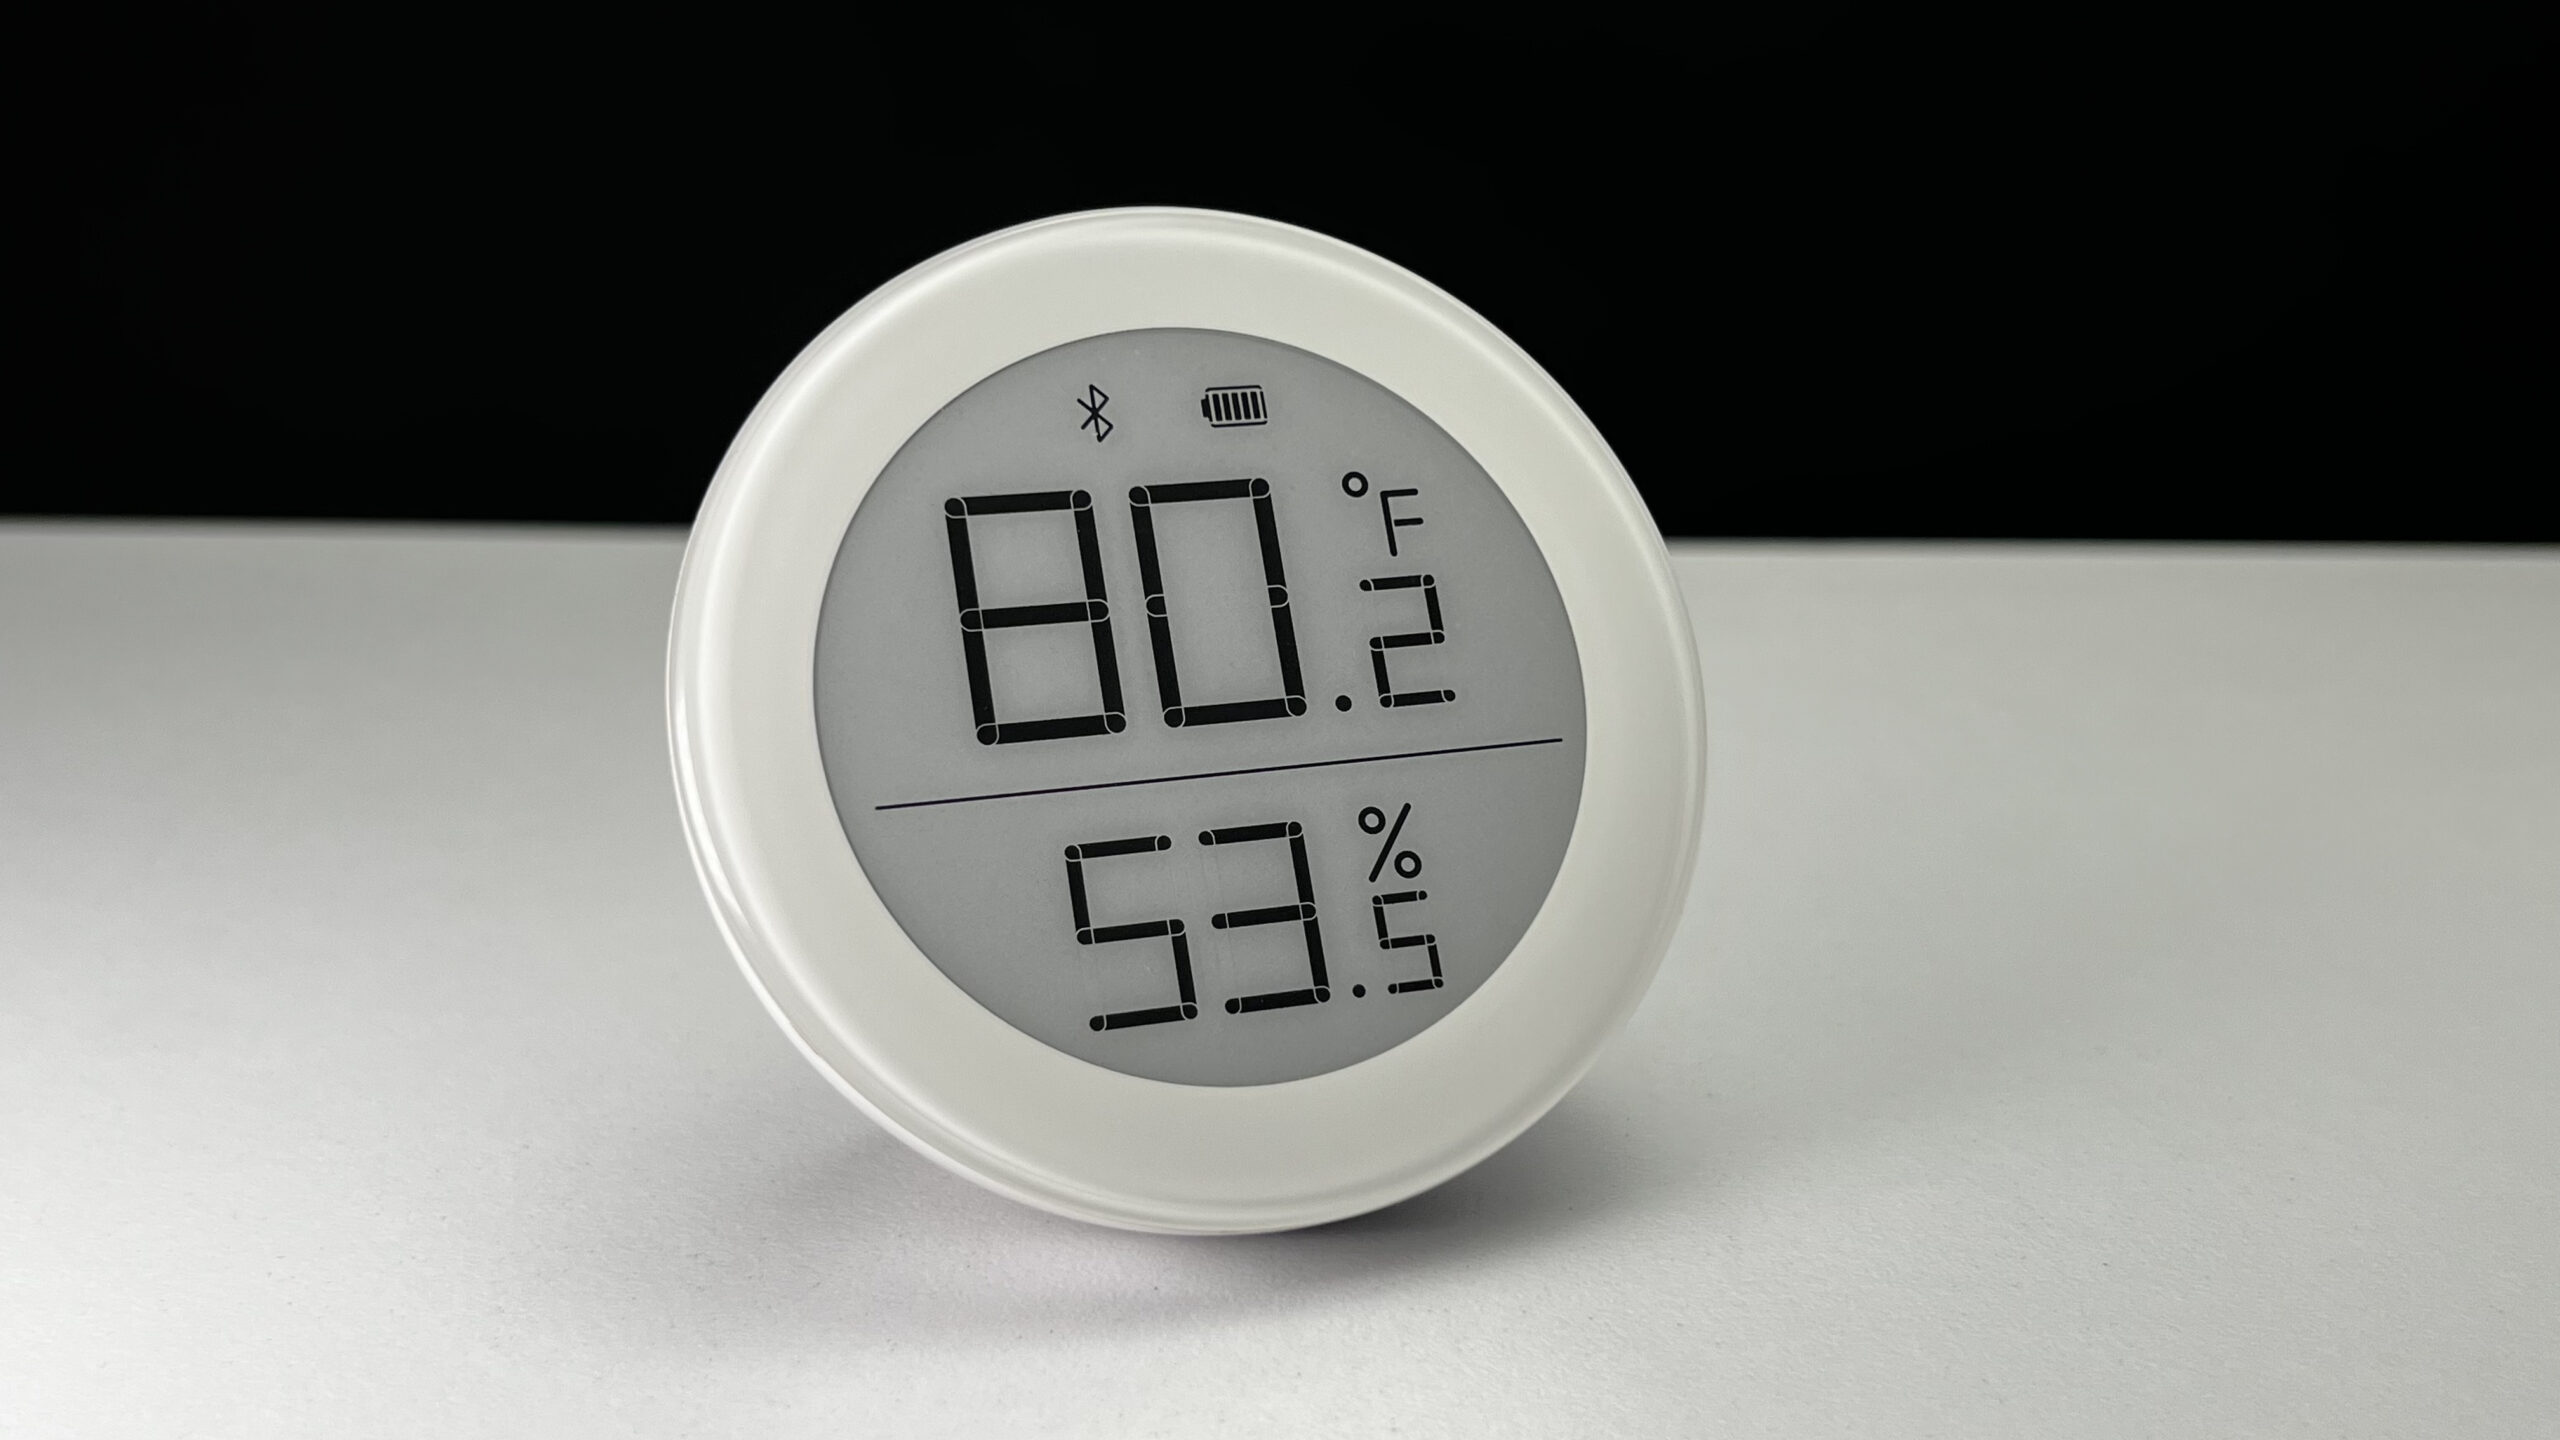 a circular white sensor with a large display showing the current temperature and humidity, the QingPing Temperature & Humidity Sensor